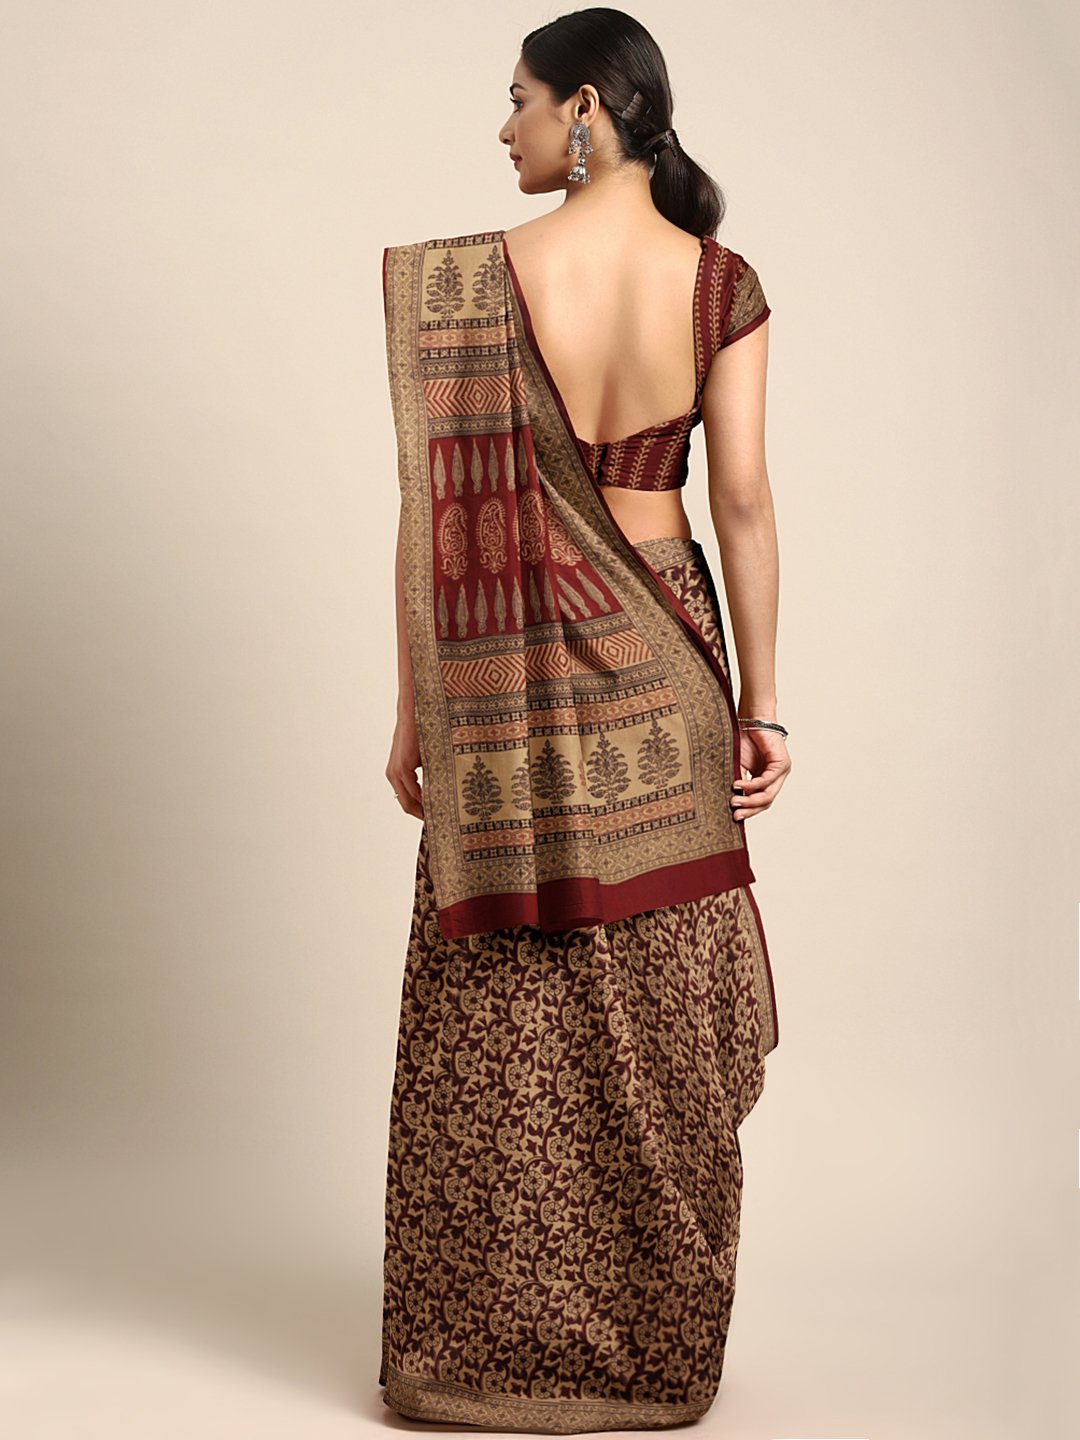 Brown Maroon Pure Cotton Handblock Print Bagh Saree-Saree-Kalakari India-MRBASA0009-Bagh, Cotton, Geographical Indication, Hand Blocks, Hand Crafted, Heritage Prints, Natural Dyes, Sarees, Sustainable Fabrics-[Linen,Ethnic,wear,Fashionista,Handloom,Handicraft,Indigo,blockprint,block,print,Cotton,Chanderi,Blue, latest,classy,party,bollywood,trendy,summer,style,traditional,formal,elegant,unique,style,hand,block,print, dabu,booti,gift,present,glamorous,affordable,collectible,Sari,Saree,printed, hol